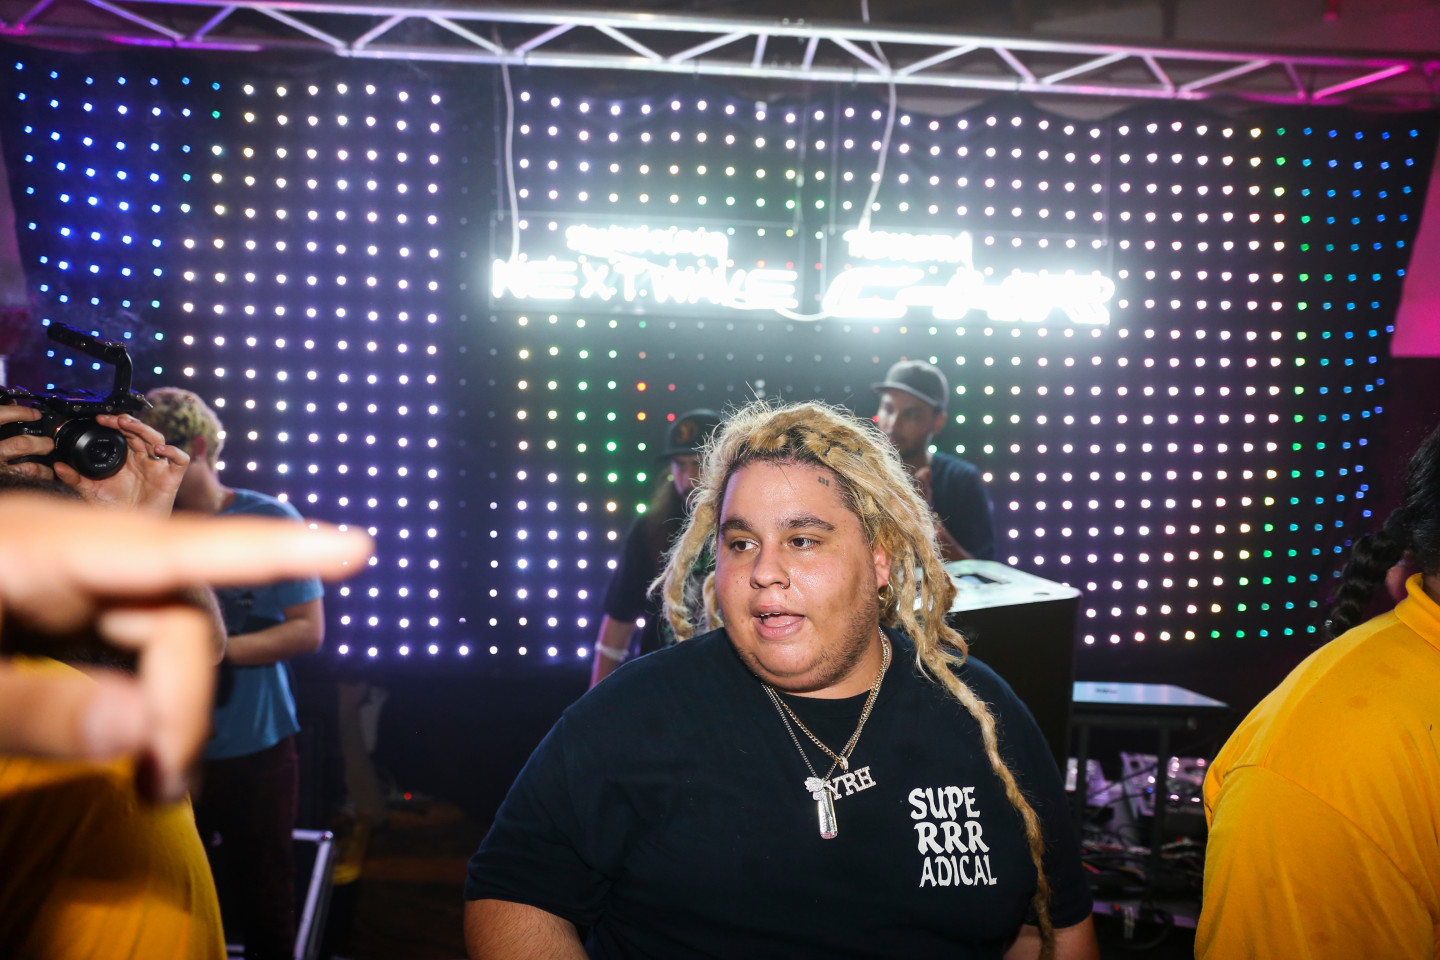 All The Pictures You Need To See From Fat Nick And Lil Tracy’s Intimate L.A. Show